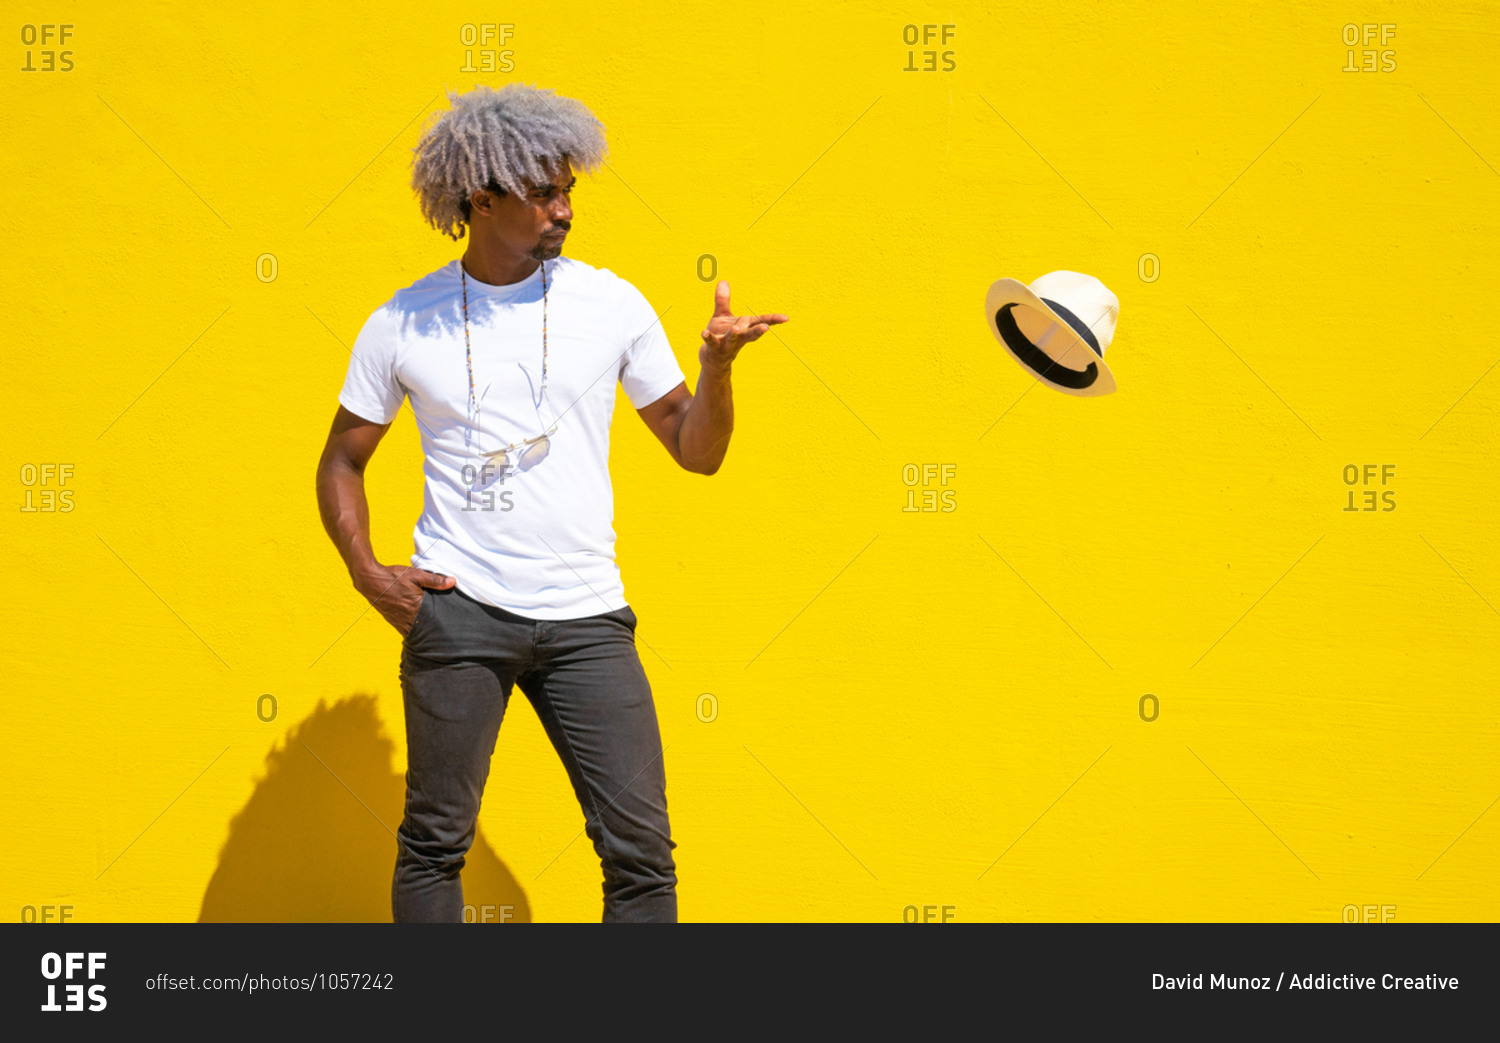 Black man with afro hair throwing a straw hat on a yellow background. concept of throwing a hat.